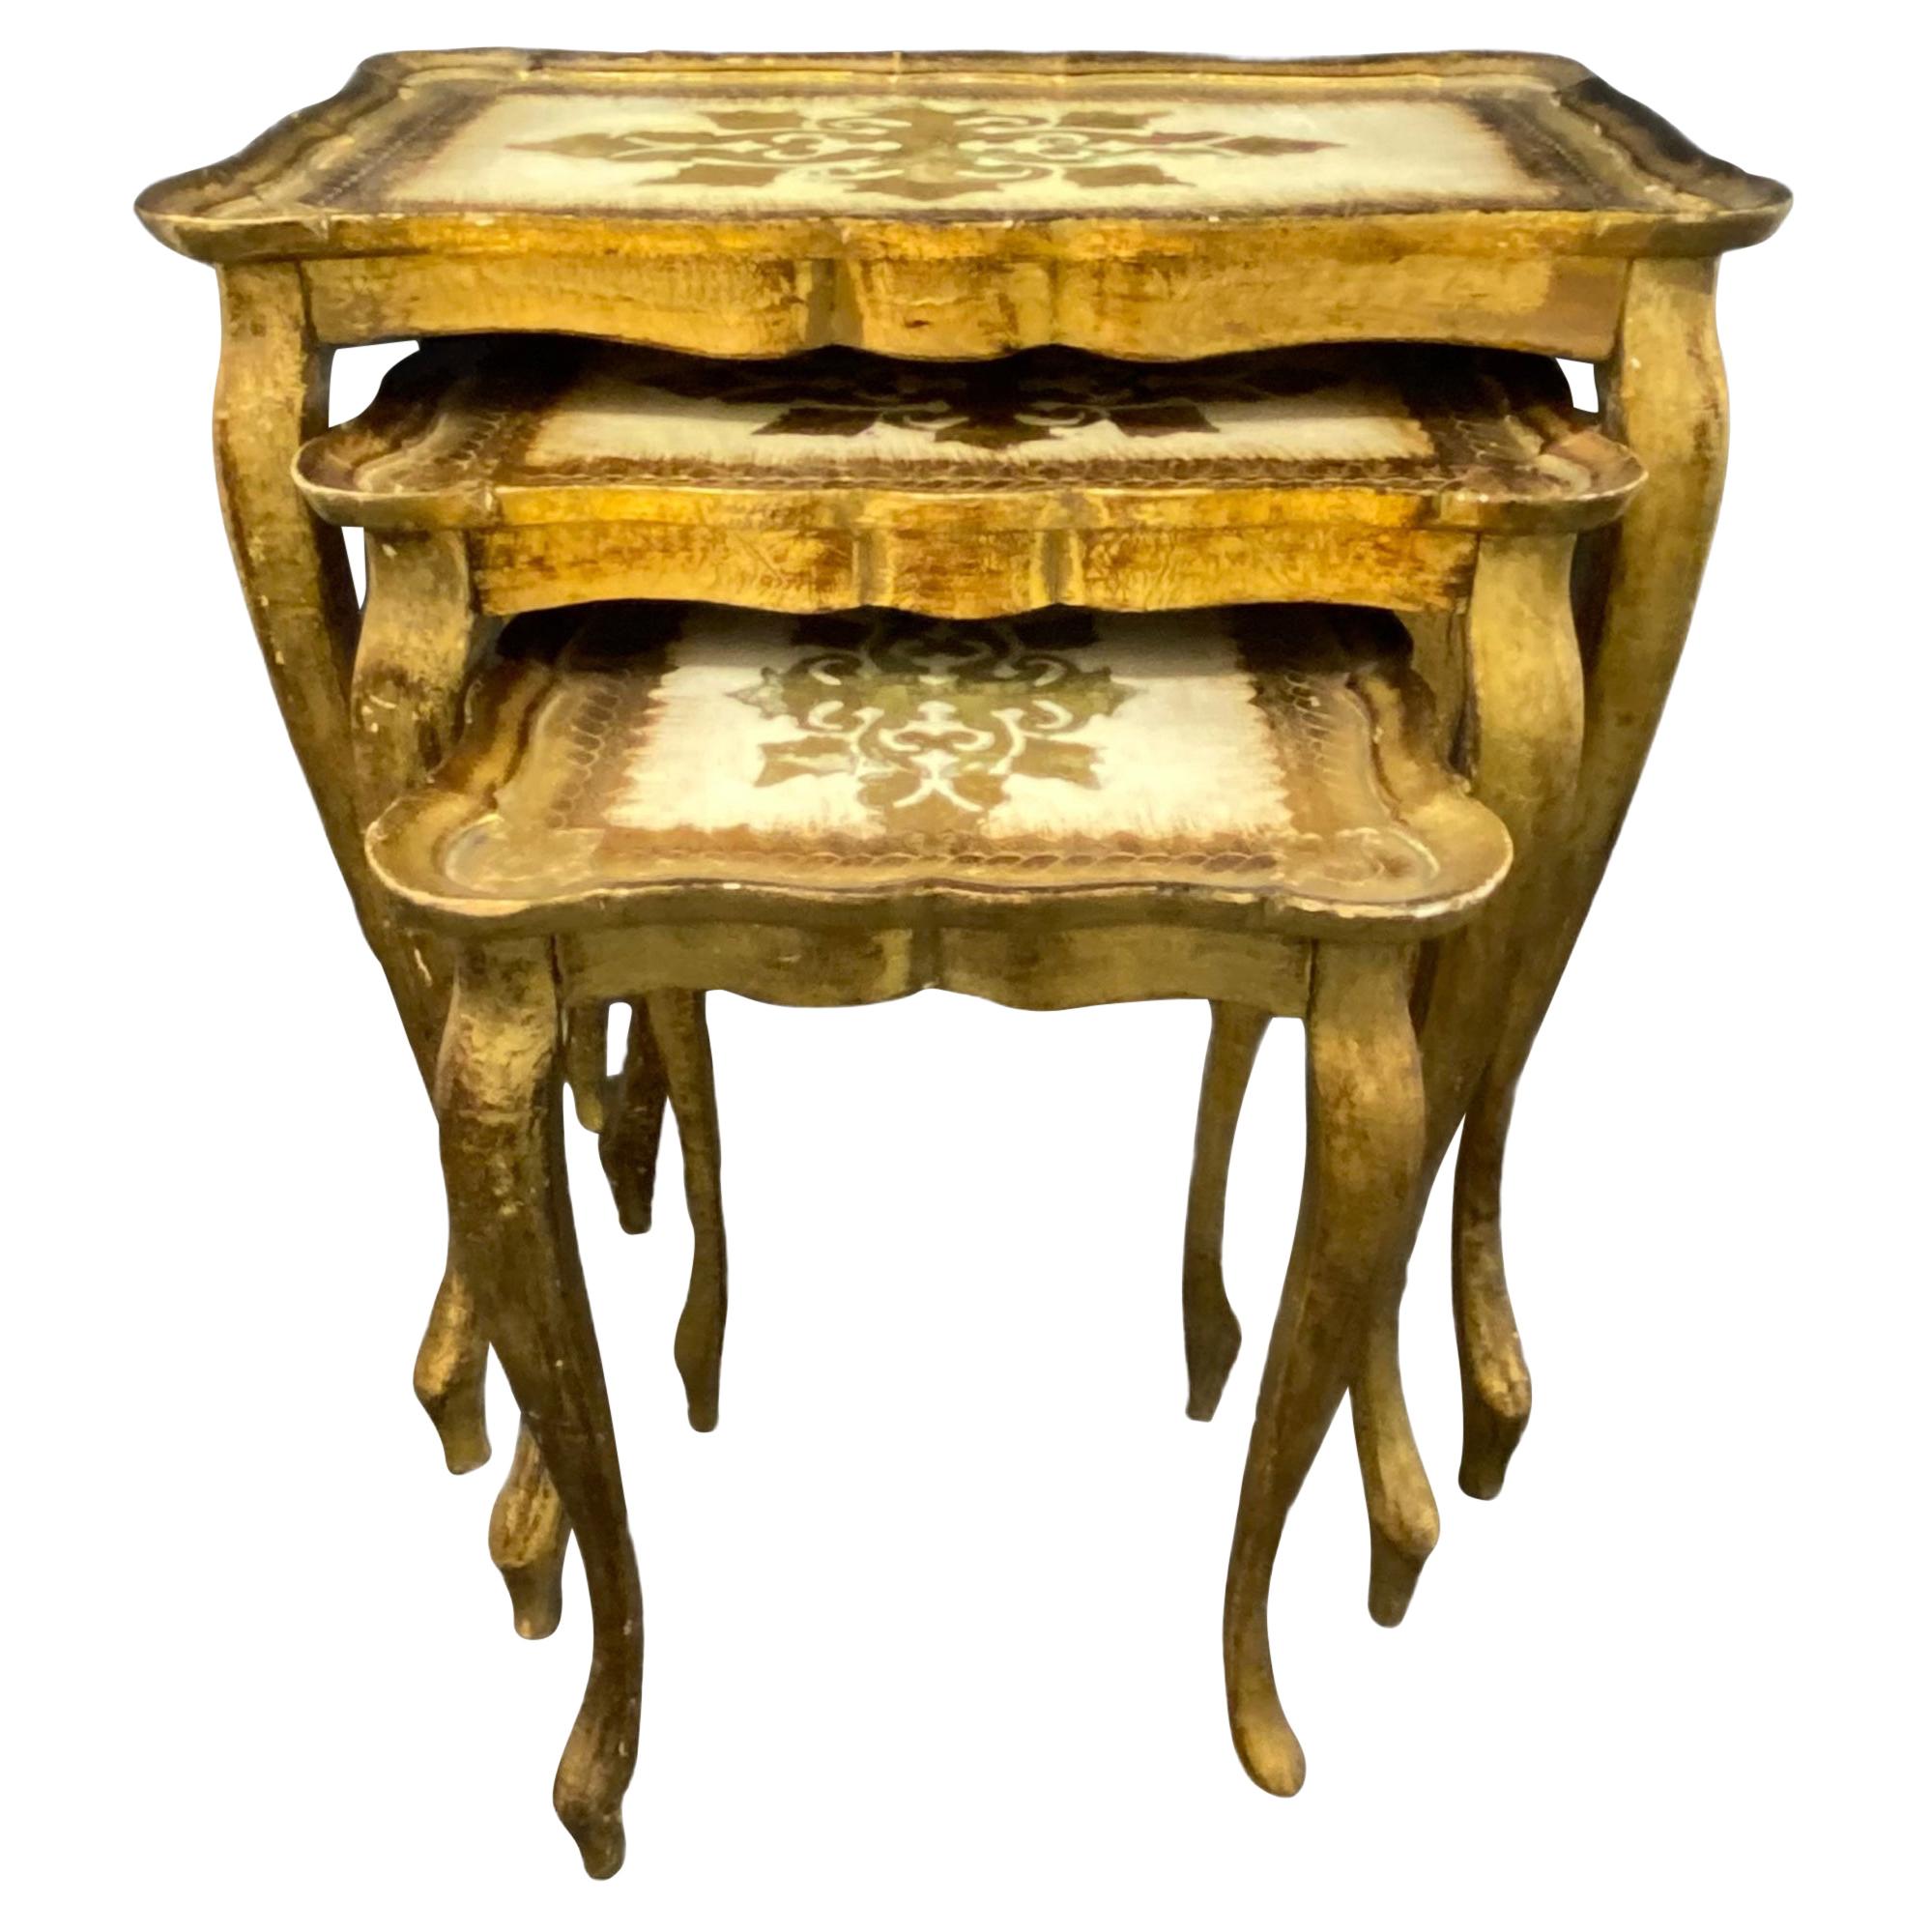 Gilded Wood Florentine Hollywood Regency Style Tole Set of Three Nesting Tables